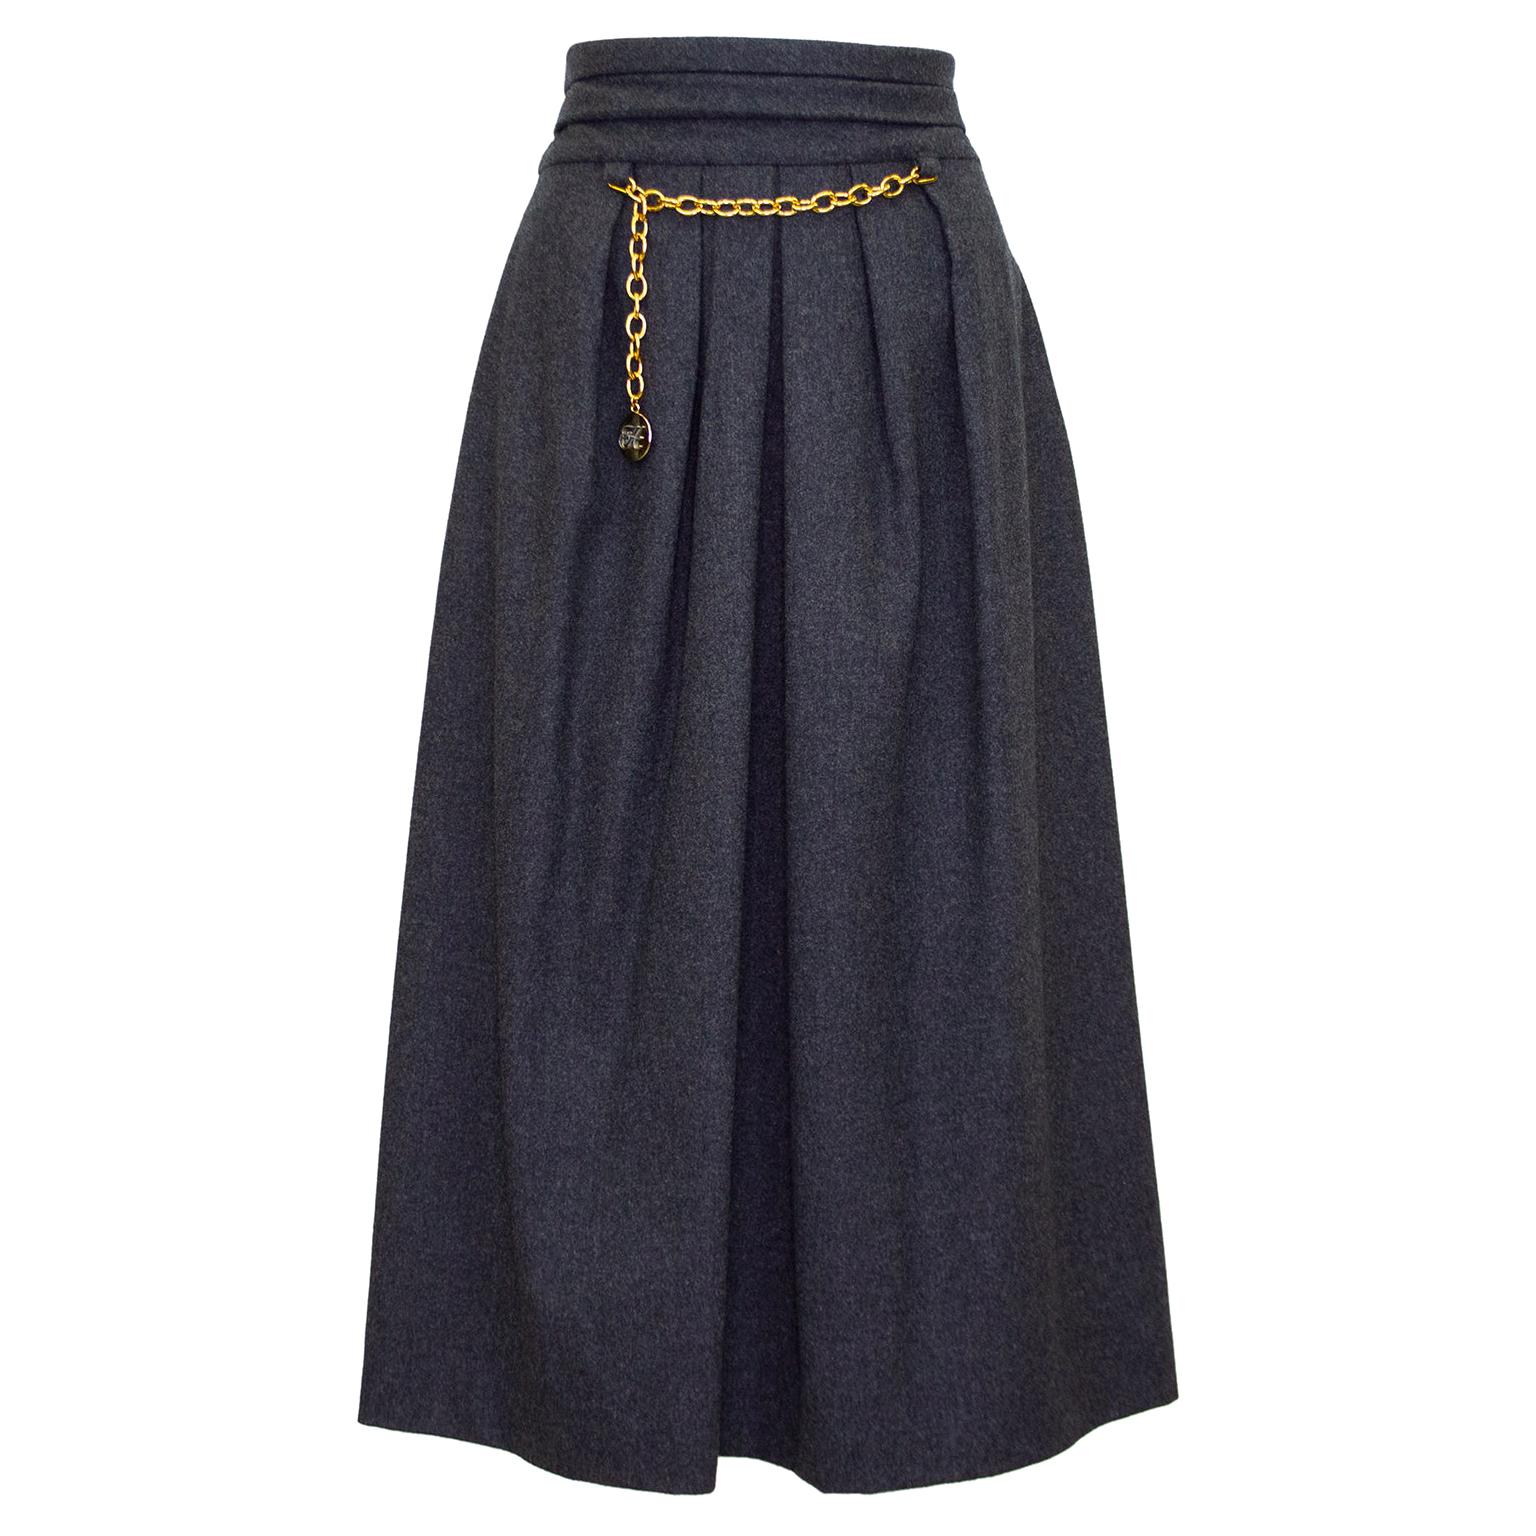 1980s Hermes Grey Wool and Cashmere Midi Skirt 